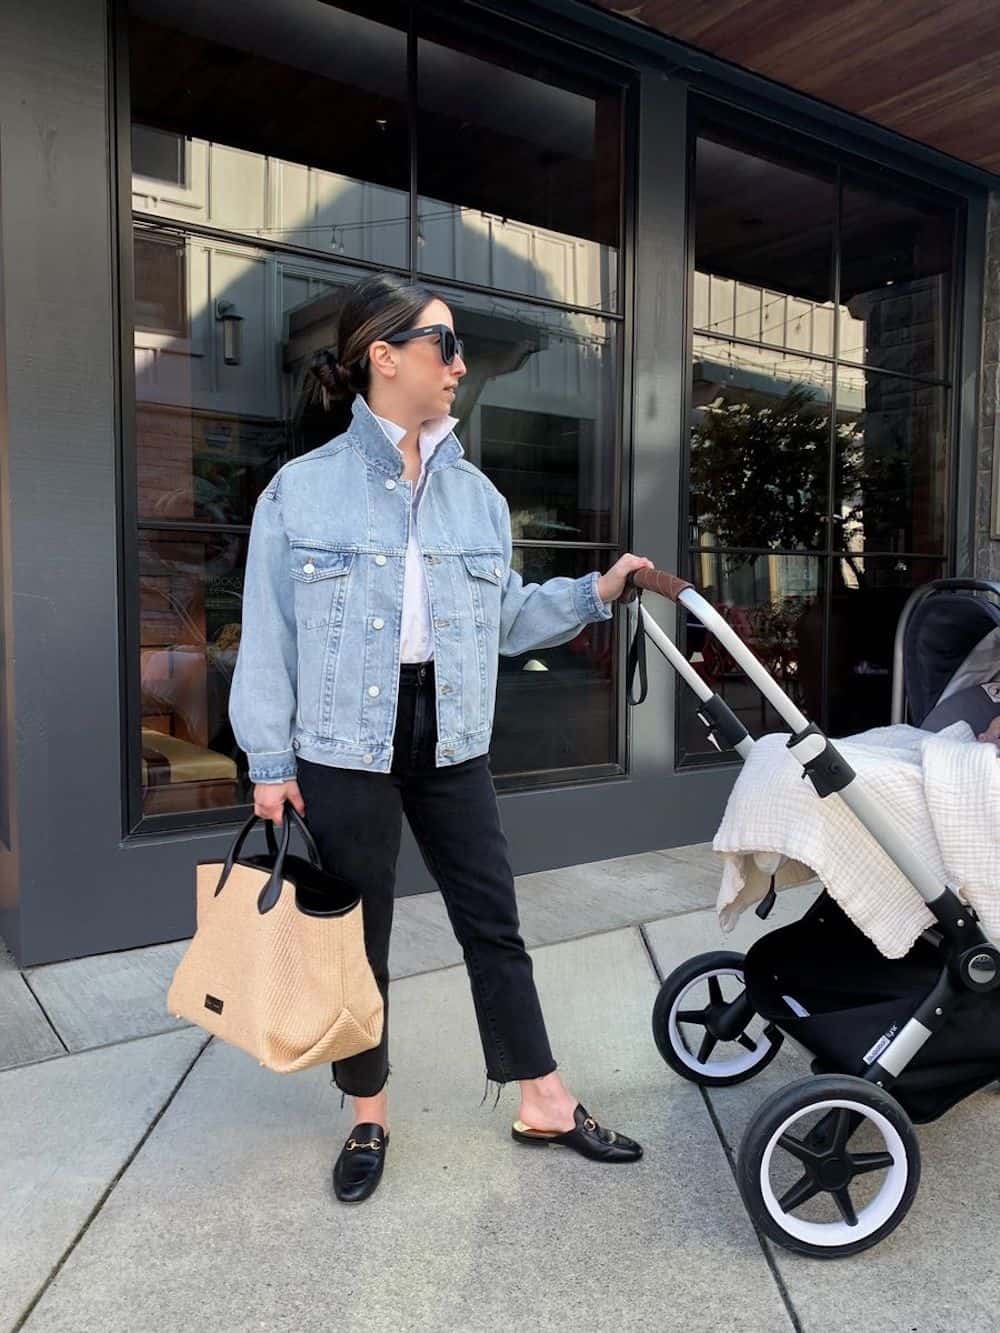 image of a woman pushing a stroller wearing black jeans, a white top, a denim jacket, and black mules